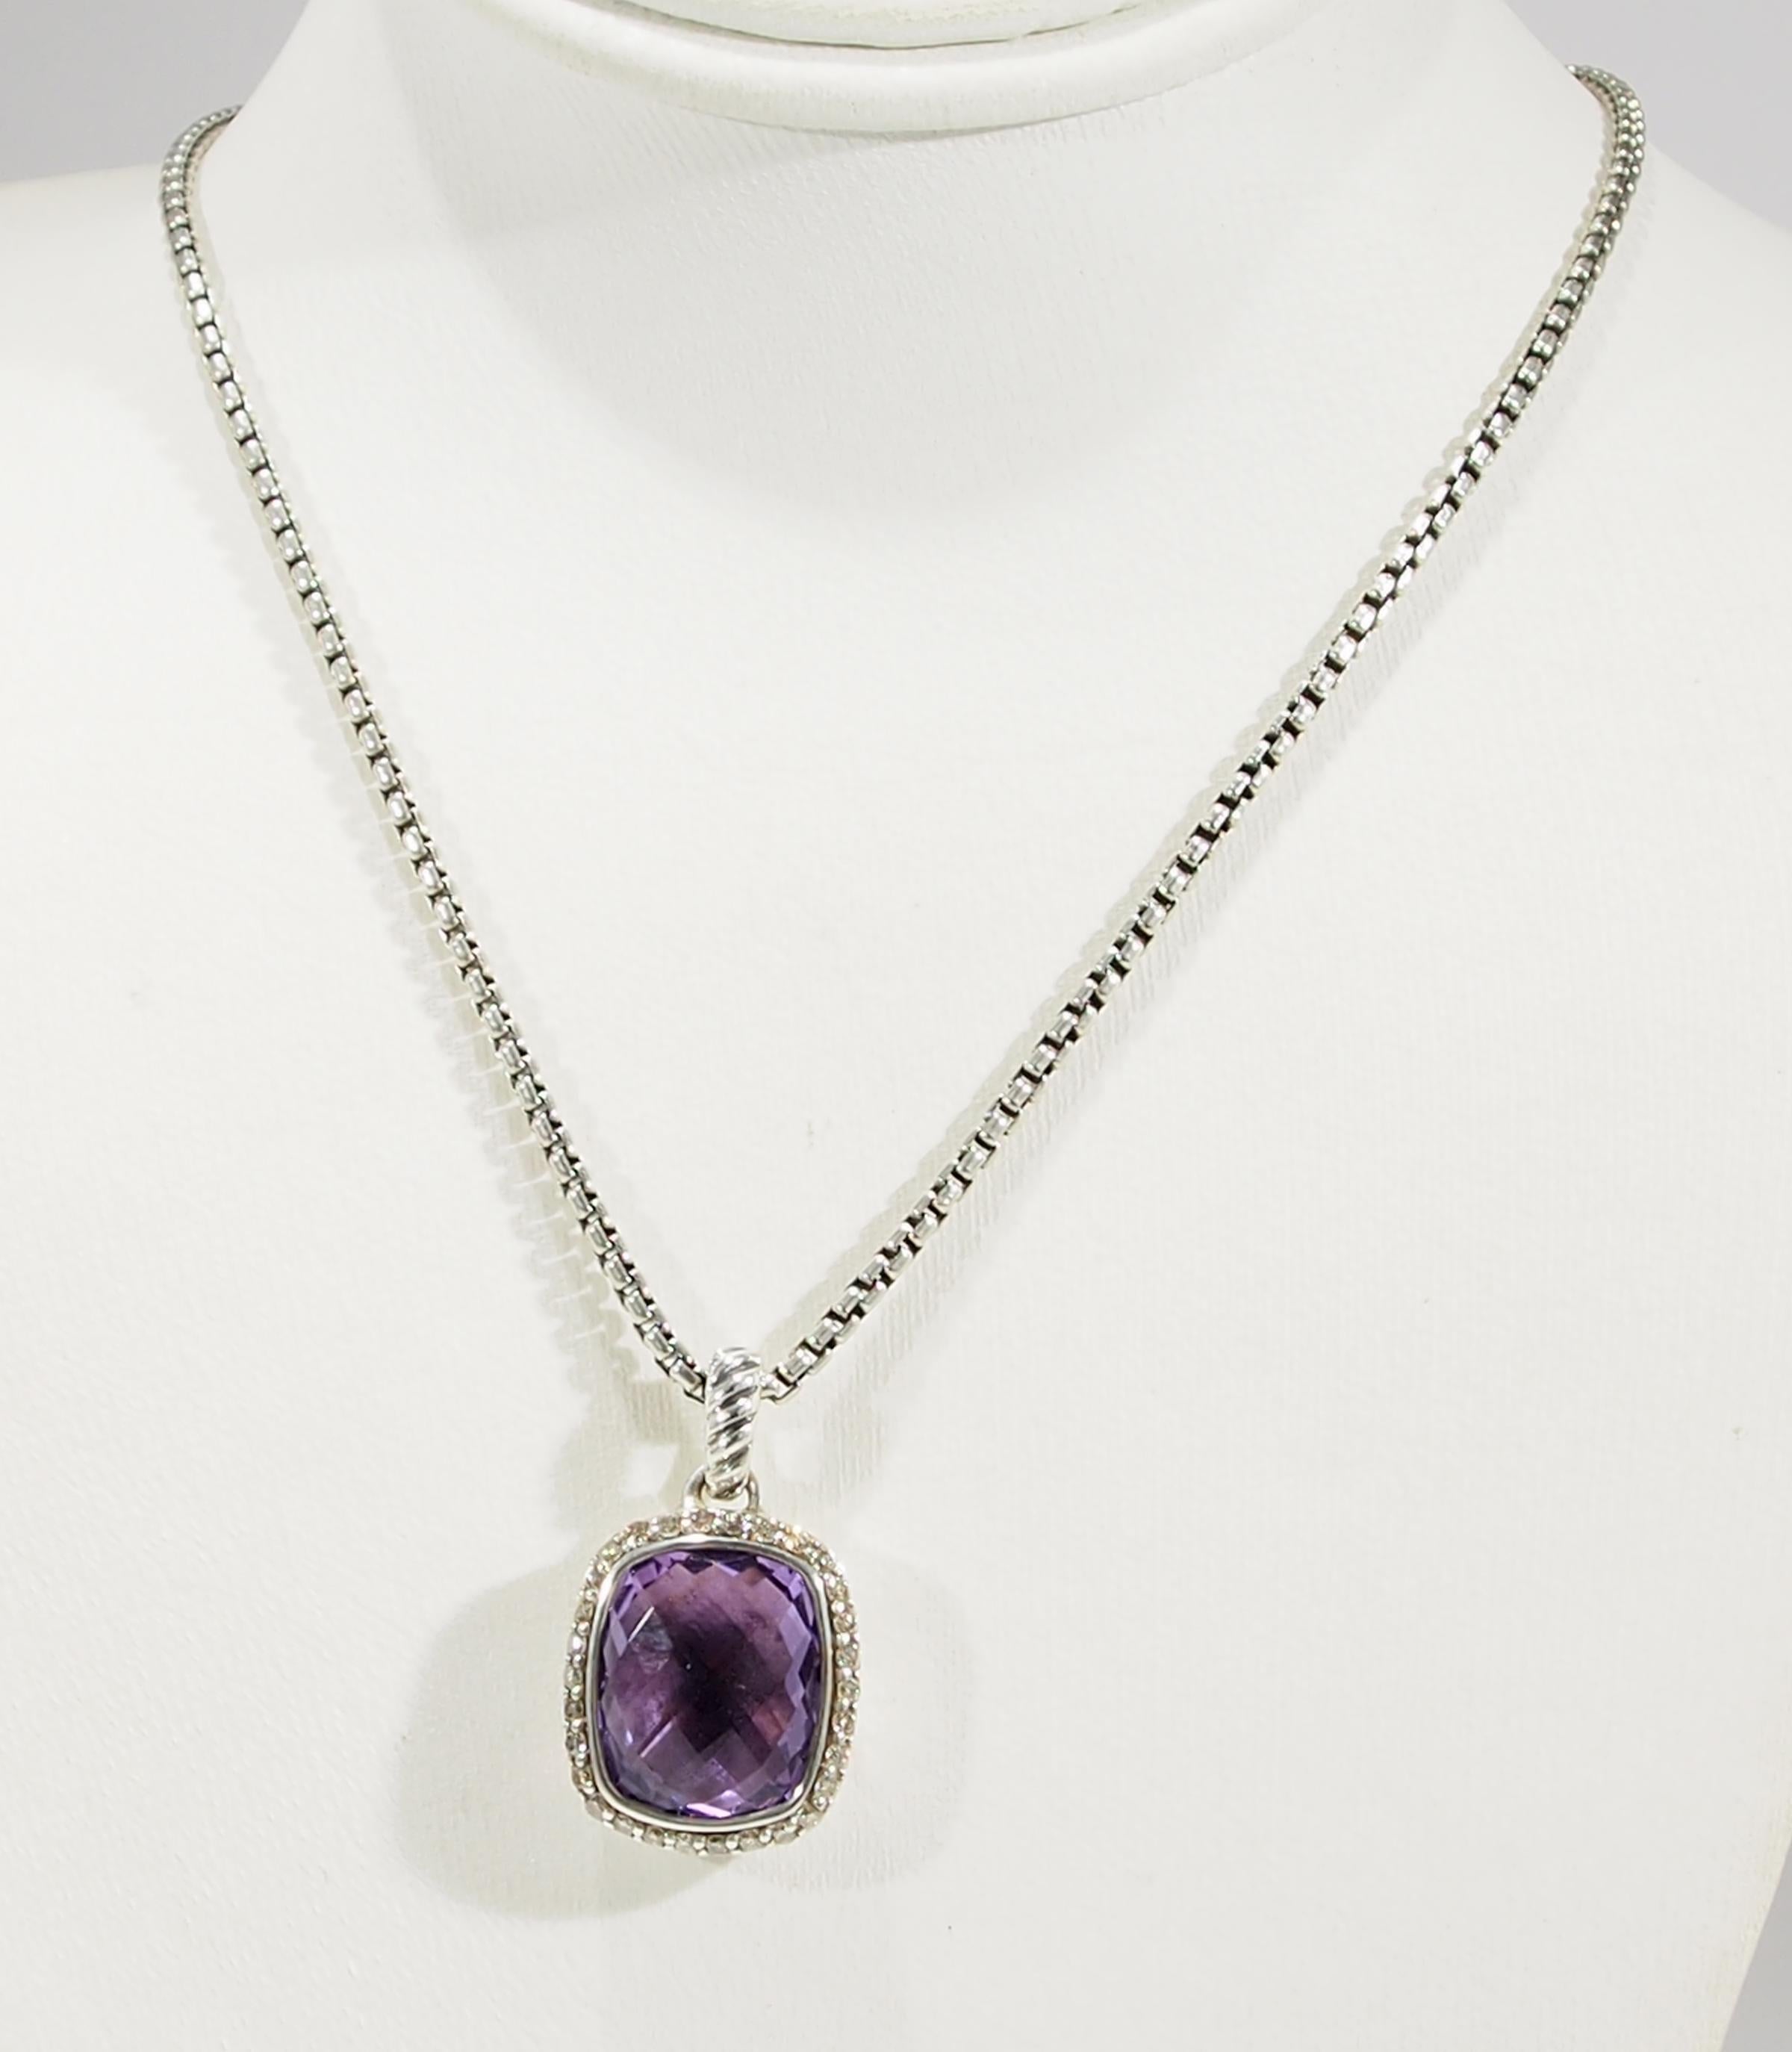 From the well known Jewelry Designer David Yurman, is this favorite Albion Amethyst Pendant With the Chain. The Pendant is with the 11mm Amethyst surrounded by (30) Round Brilliant Cut Diamonds, approximately 0.23ctw. This Pendant includes the David